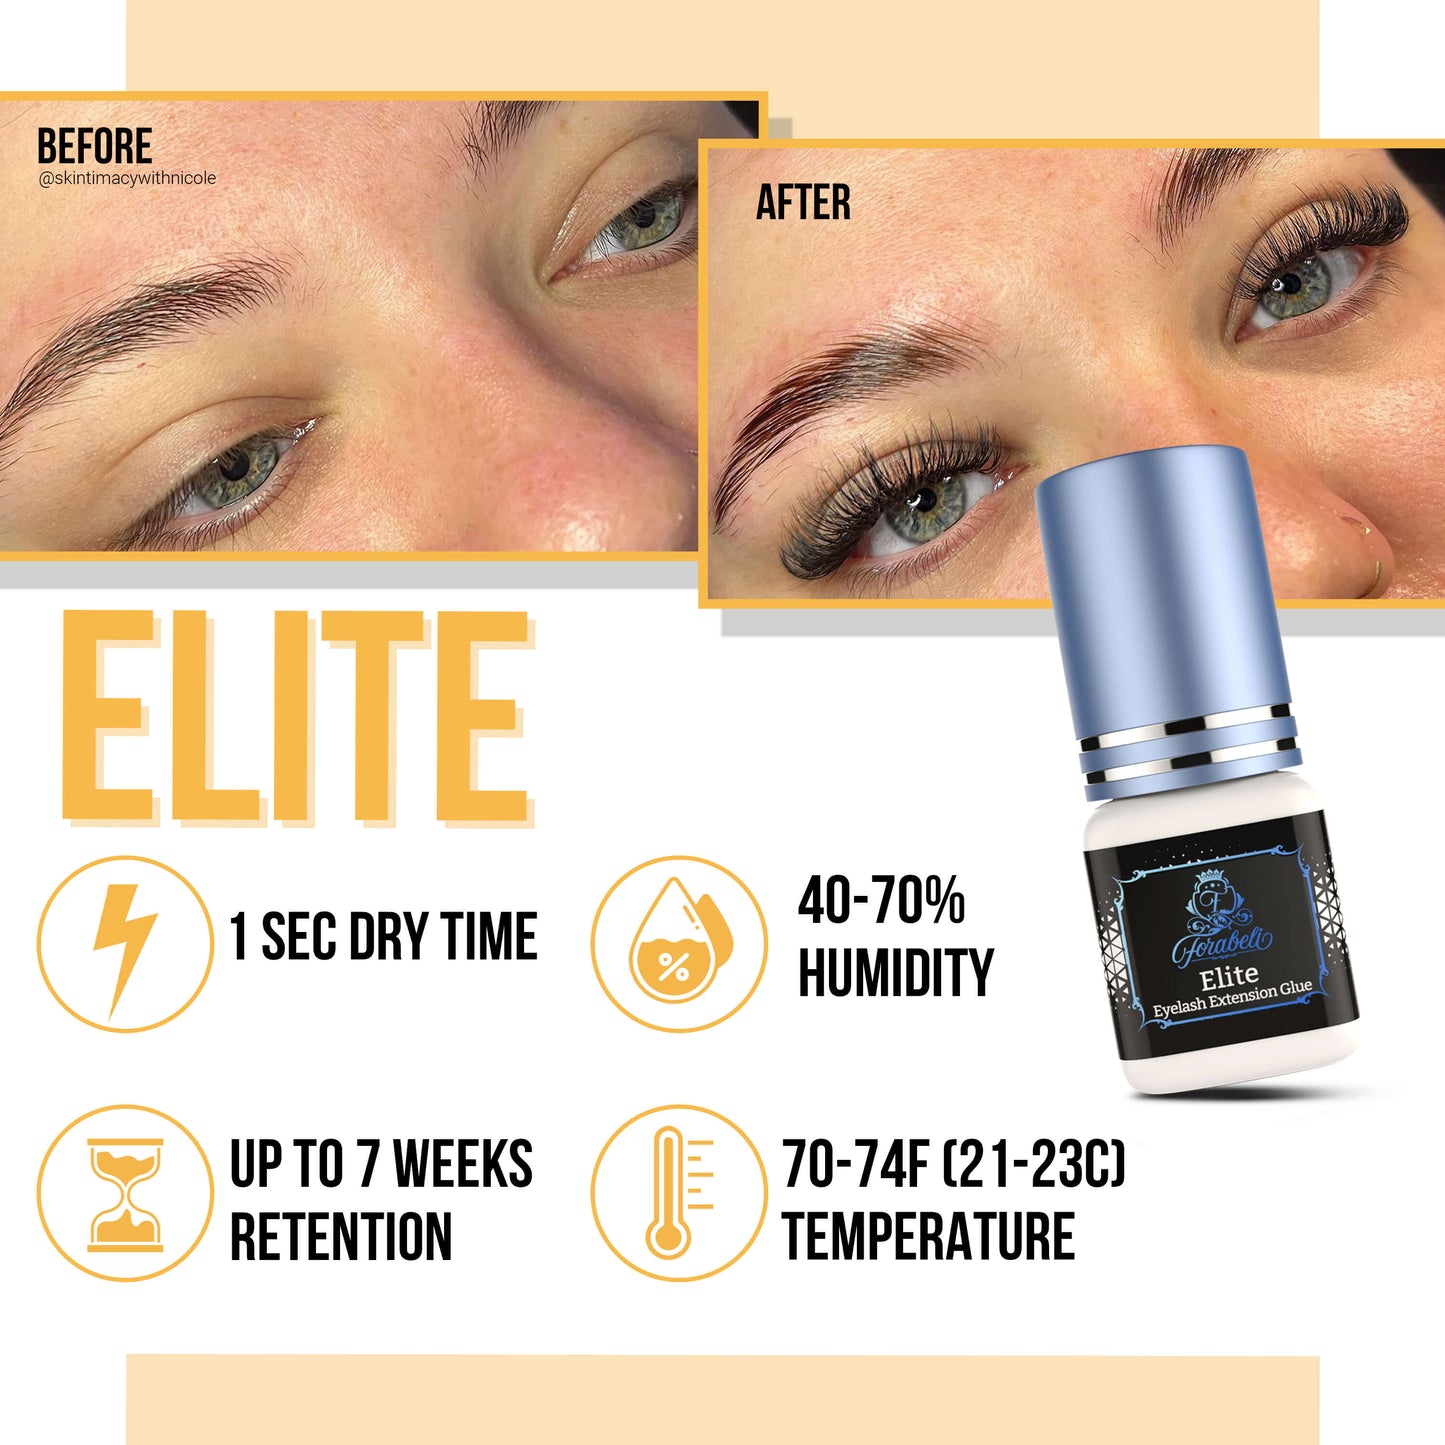 Elite eyelash extension glue with a rapid drying time of 1 second, impressive retention lasting up to 7 weeks. Ideal for environments with 40-70% relative humidity and temperatures between 70-74°F (21-23°C).